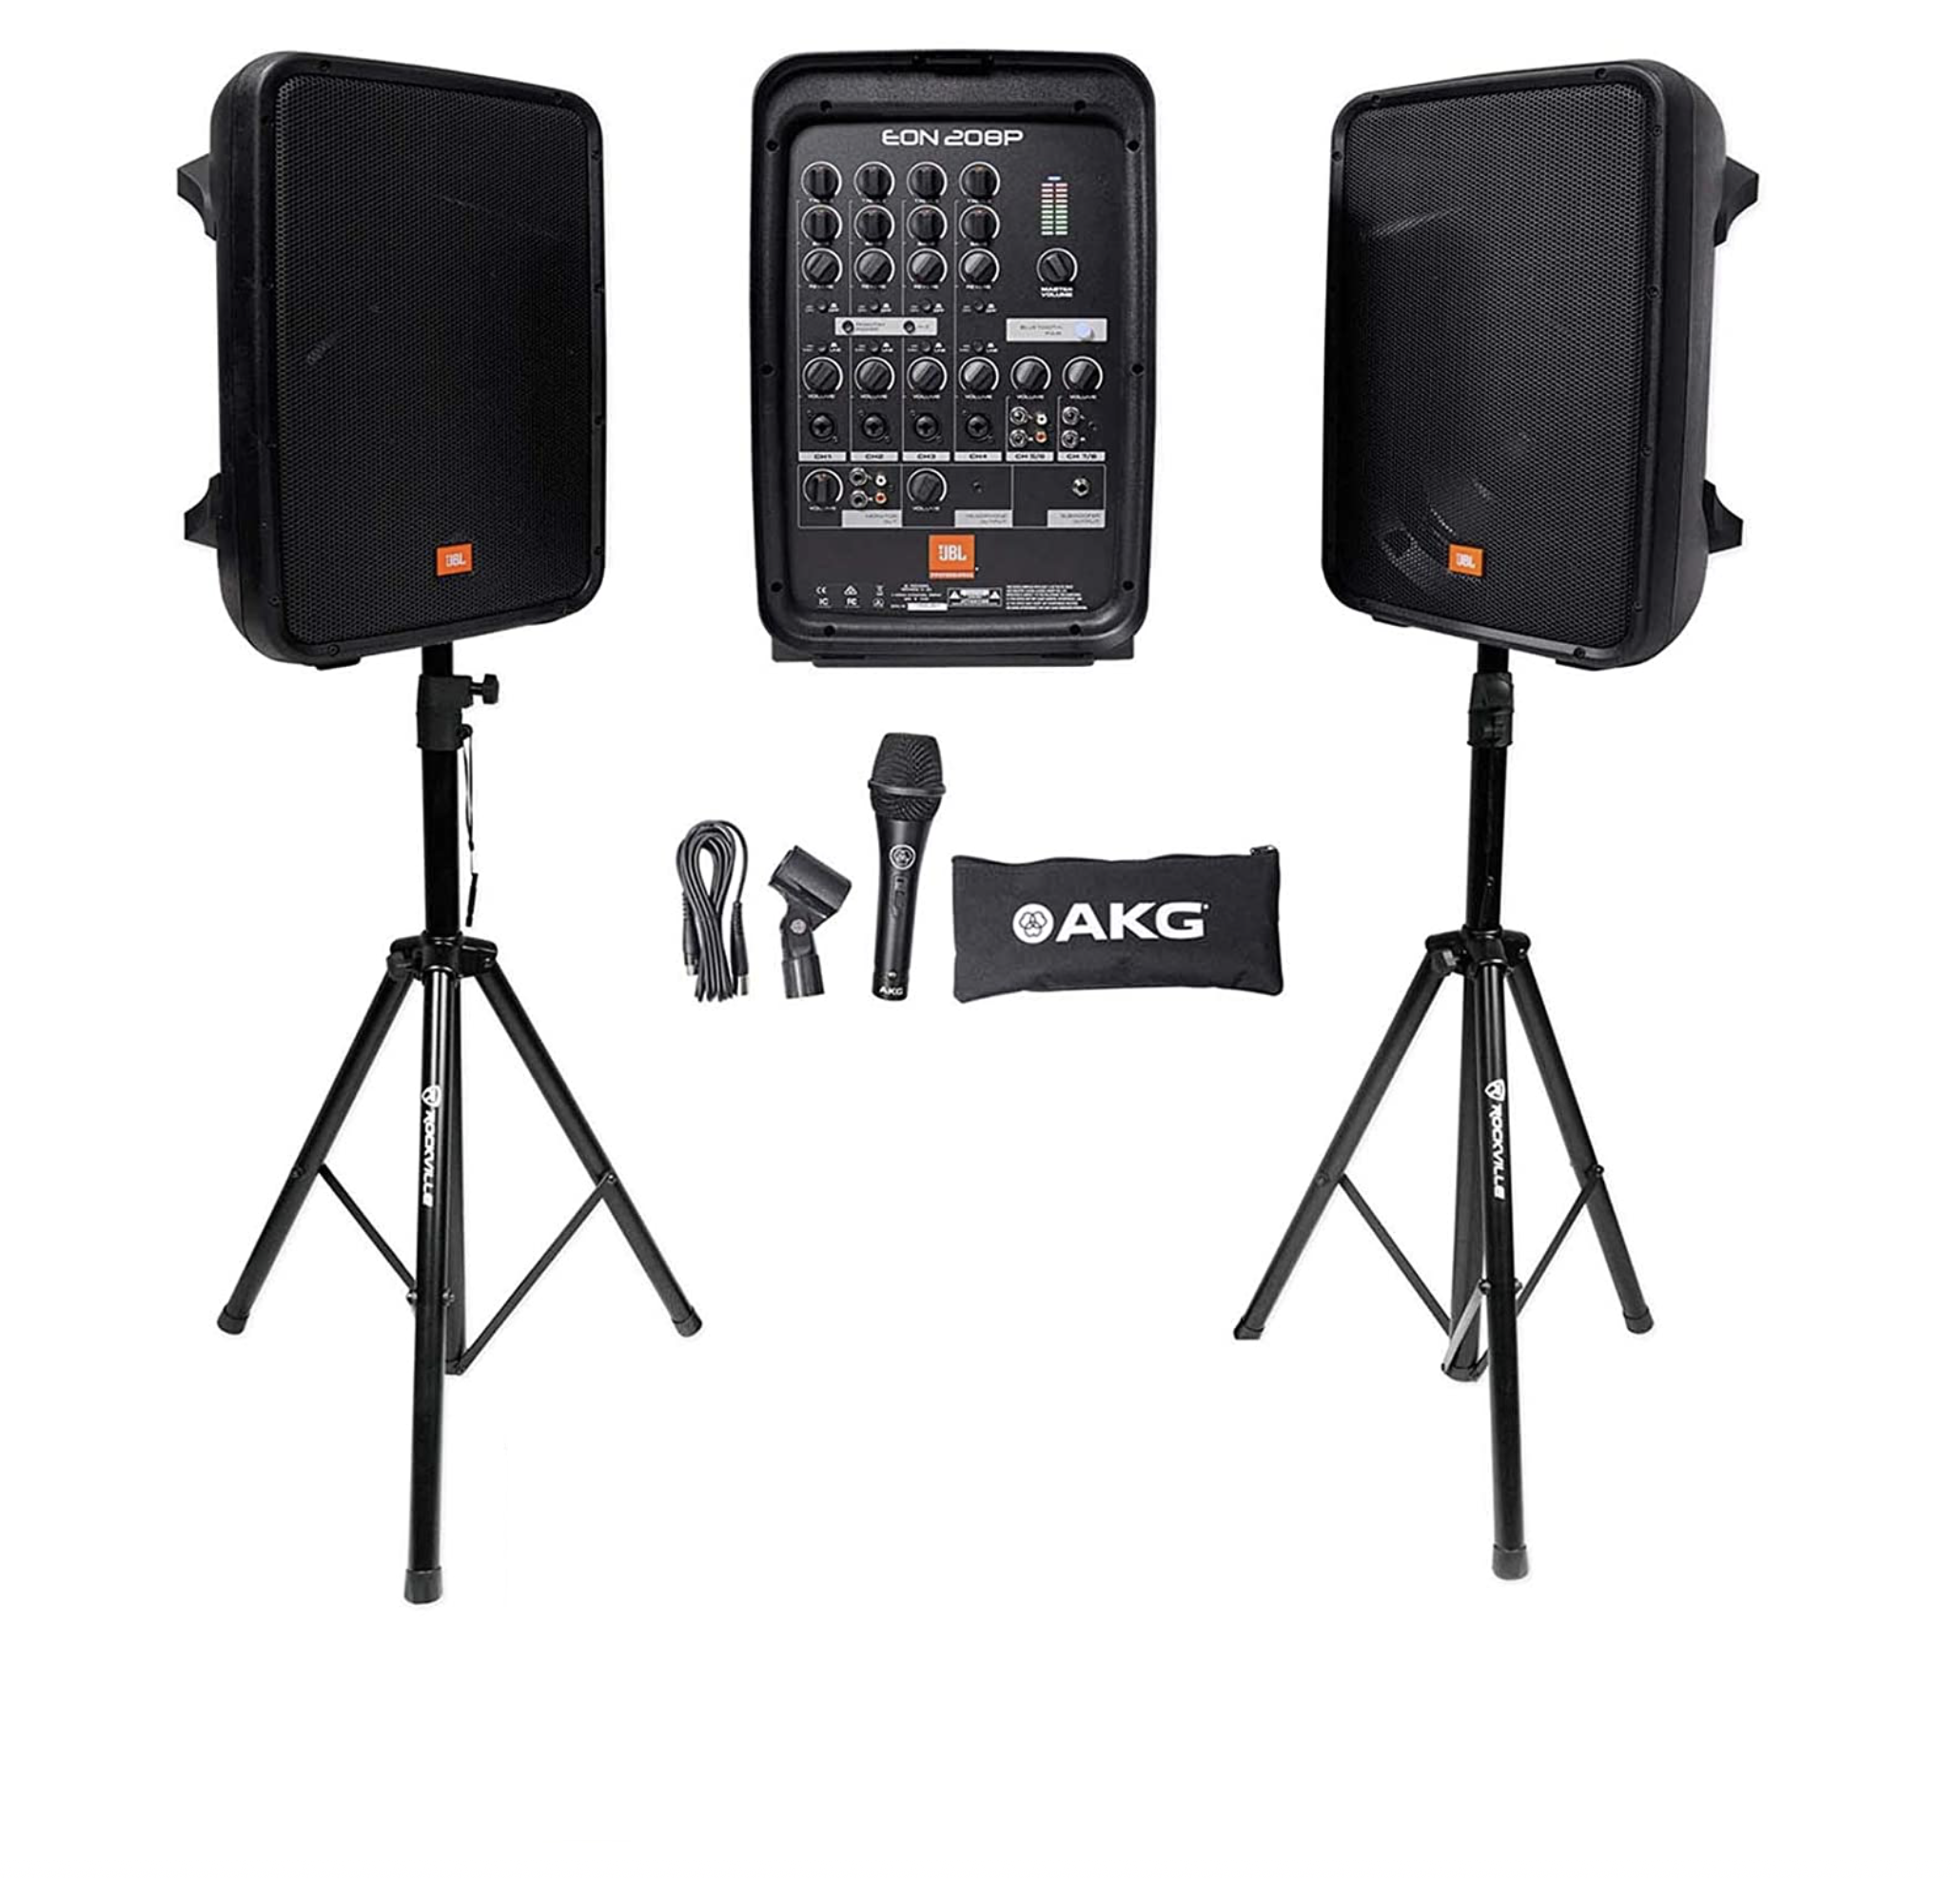 DJ equipment including speakers and microphone